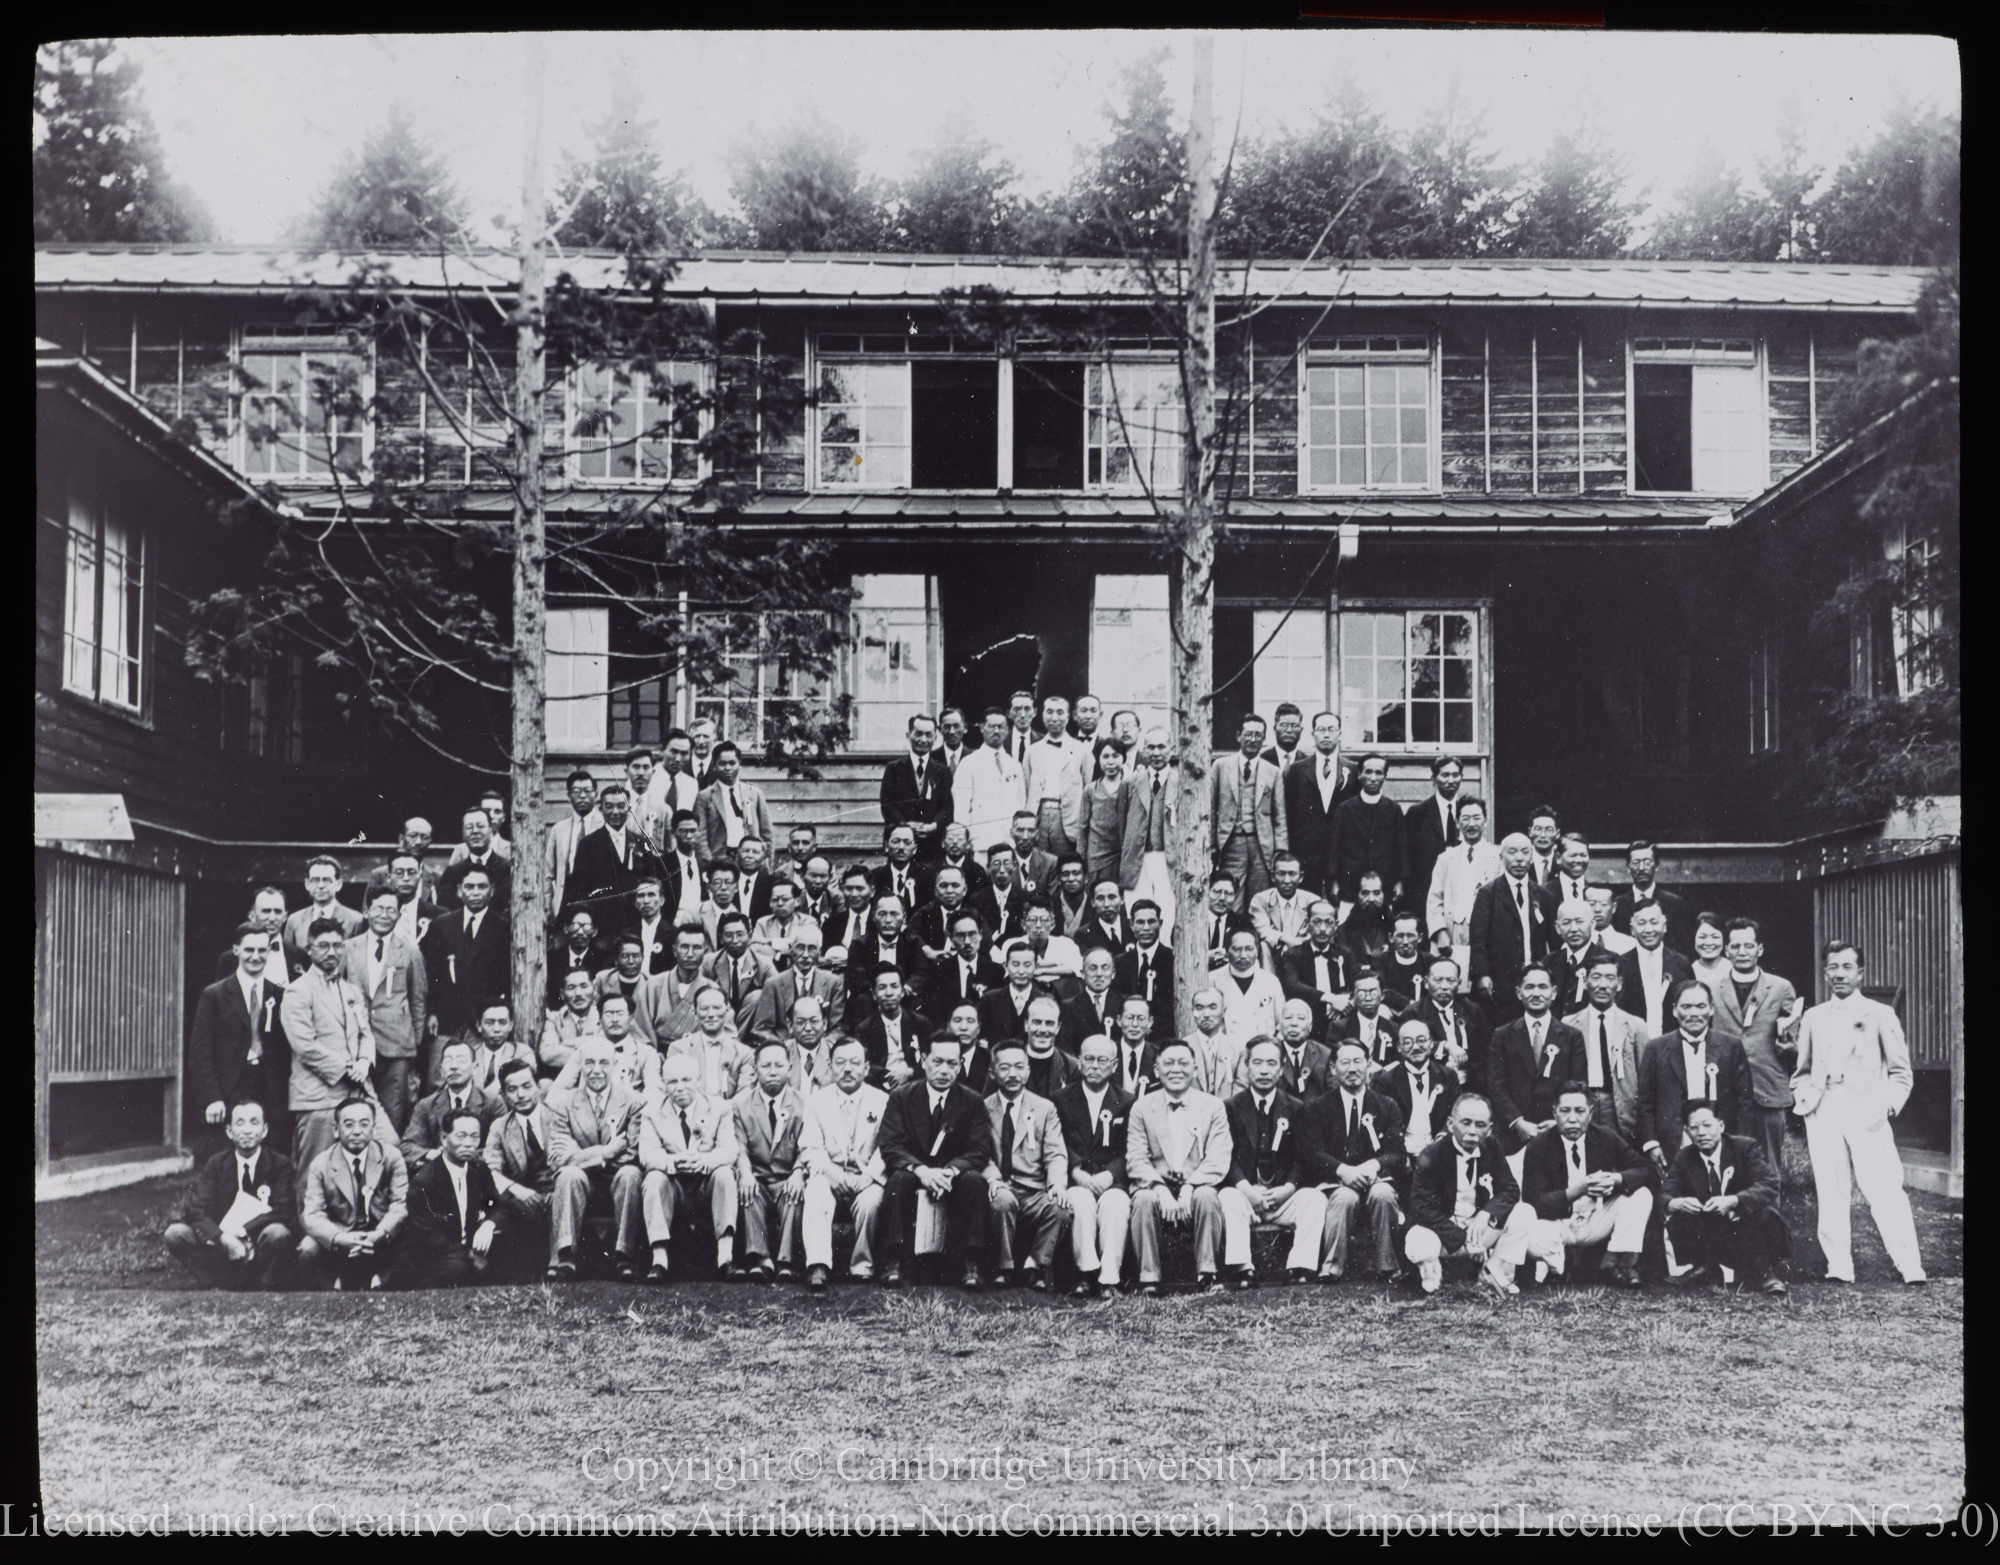 Members of the Kingdom of God Movement, 1930